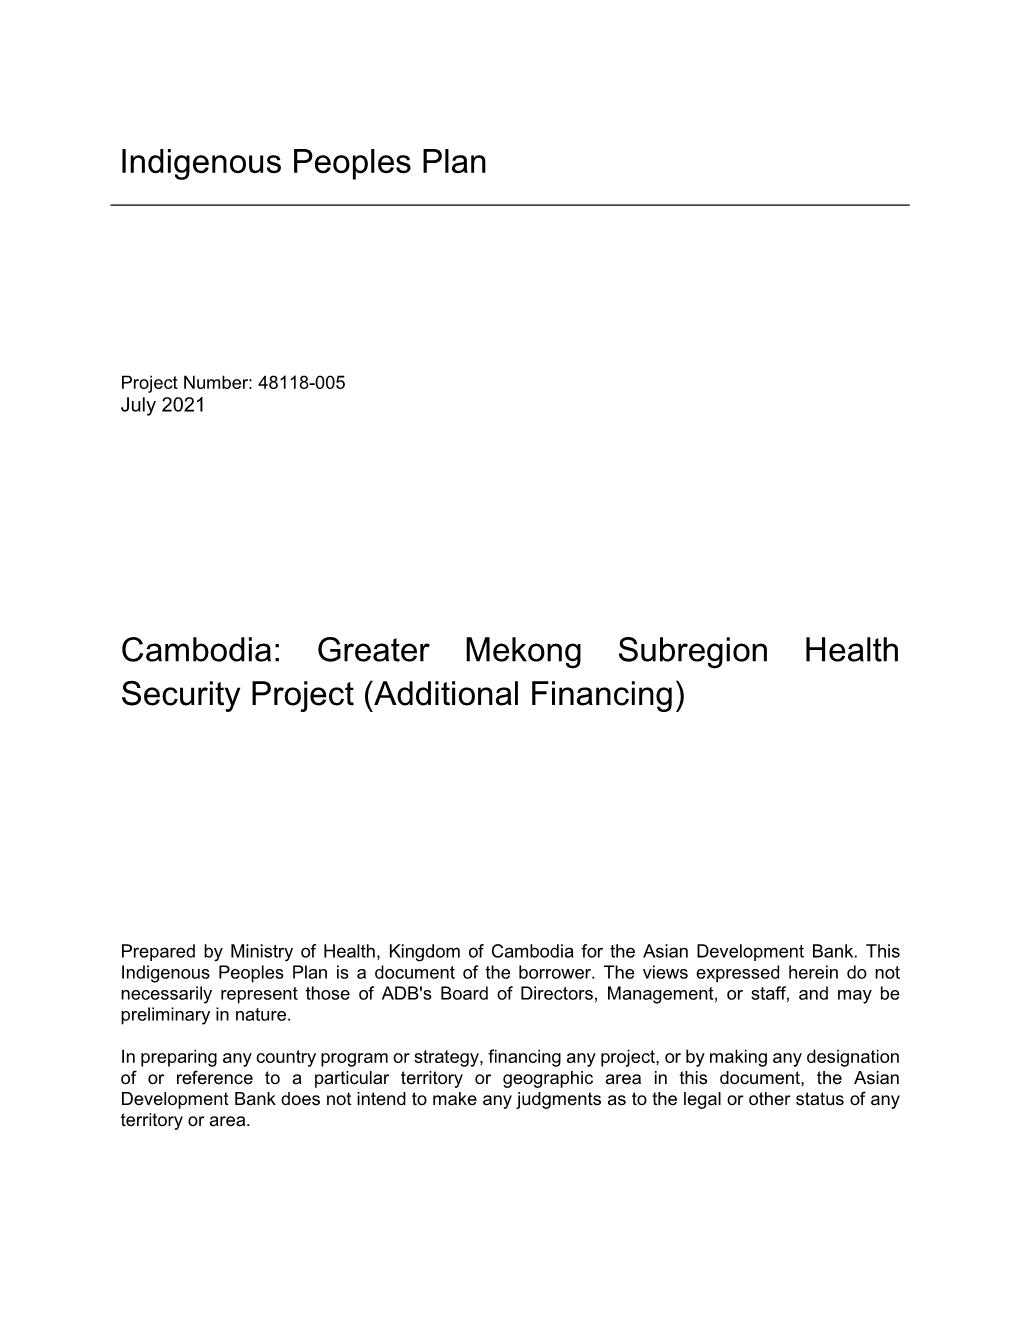 Indigenous Peoples Plan Cambodia: Greater Mekong Subregion Health